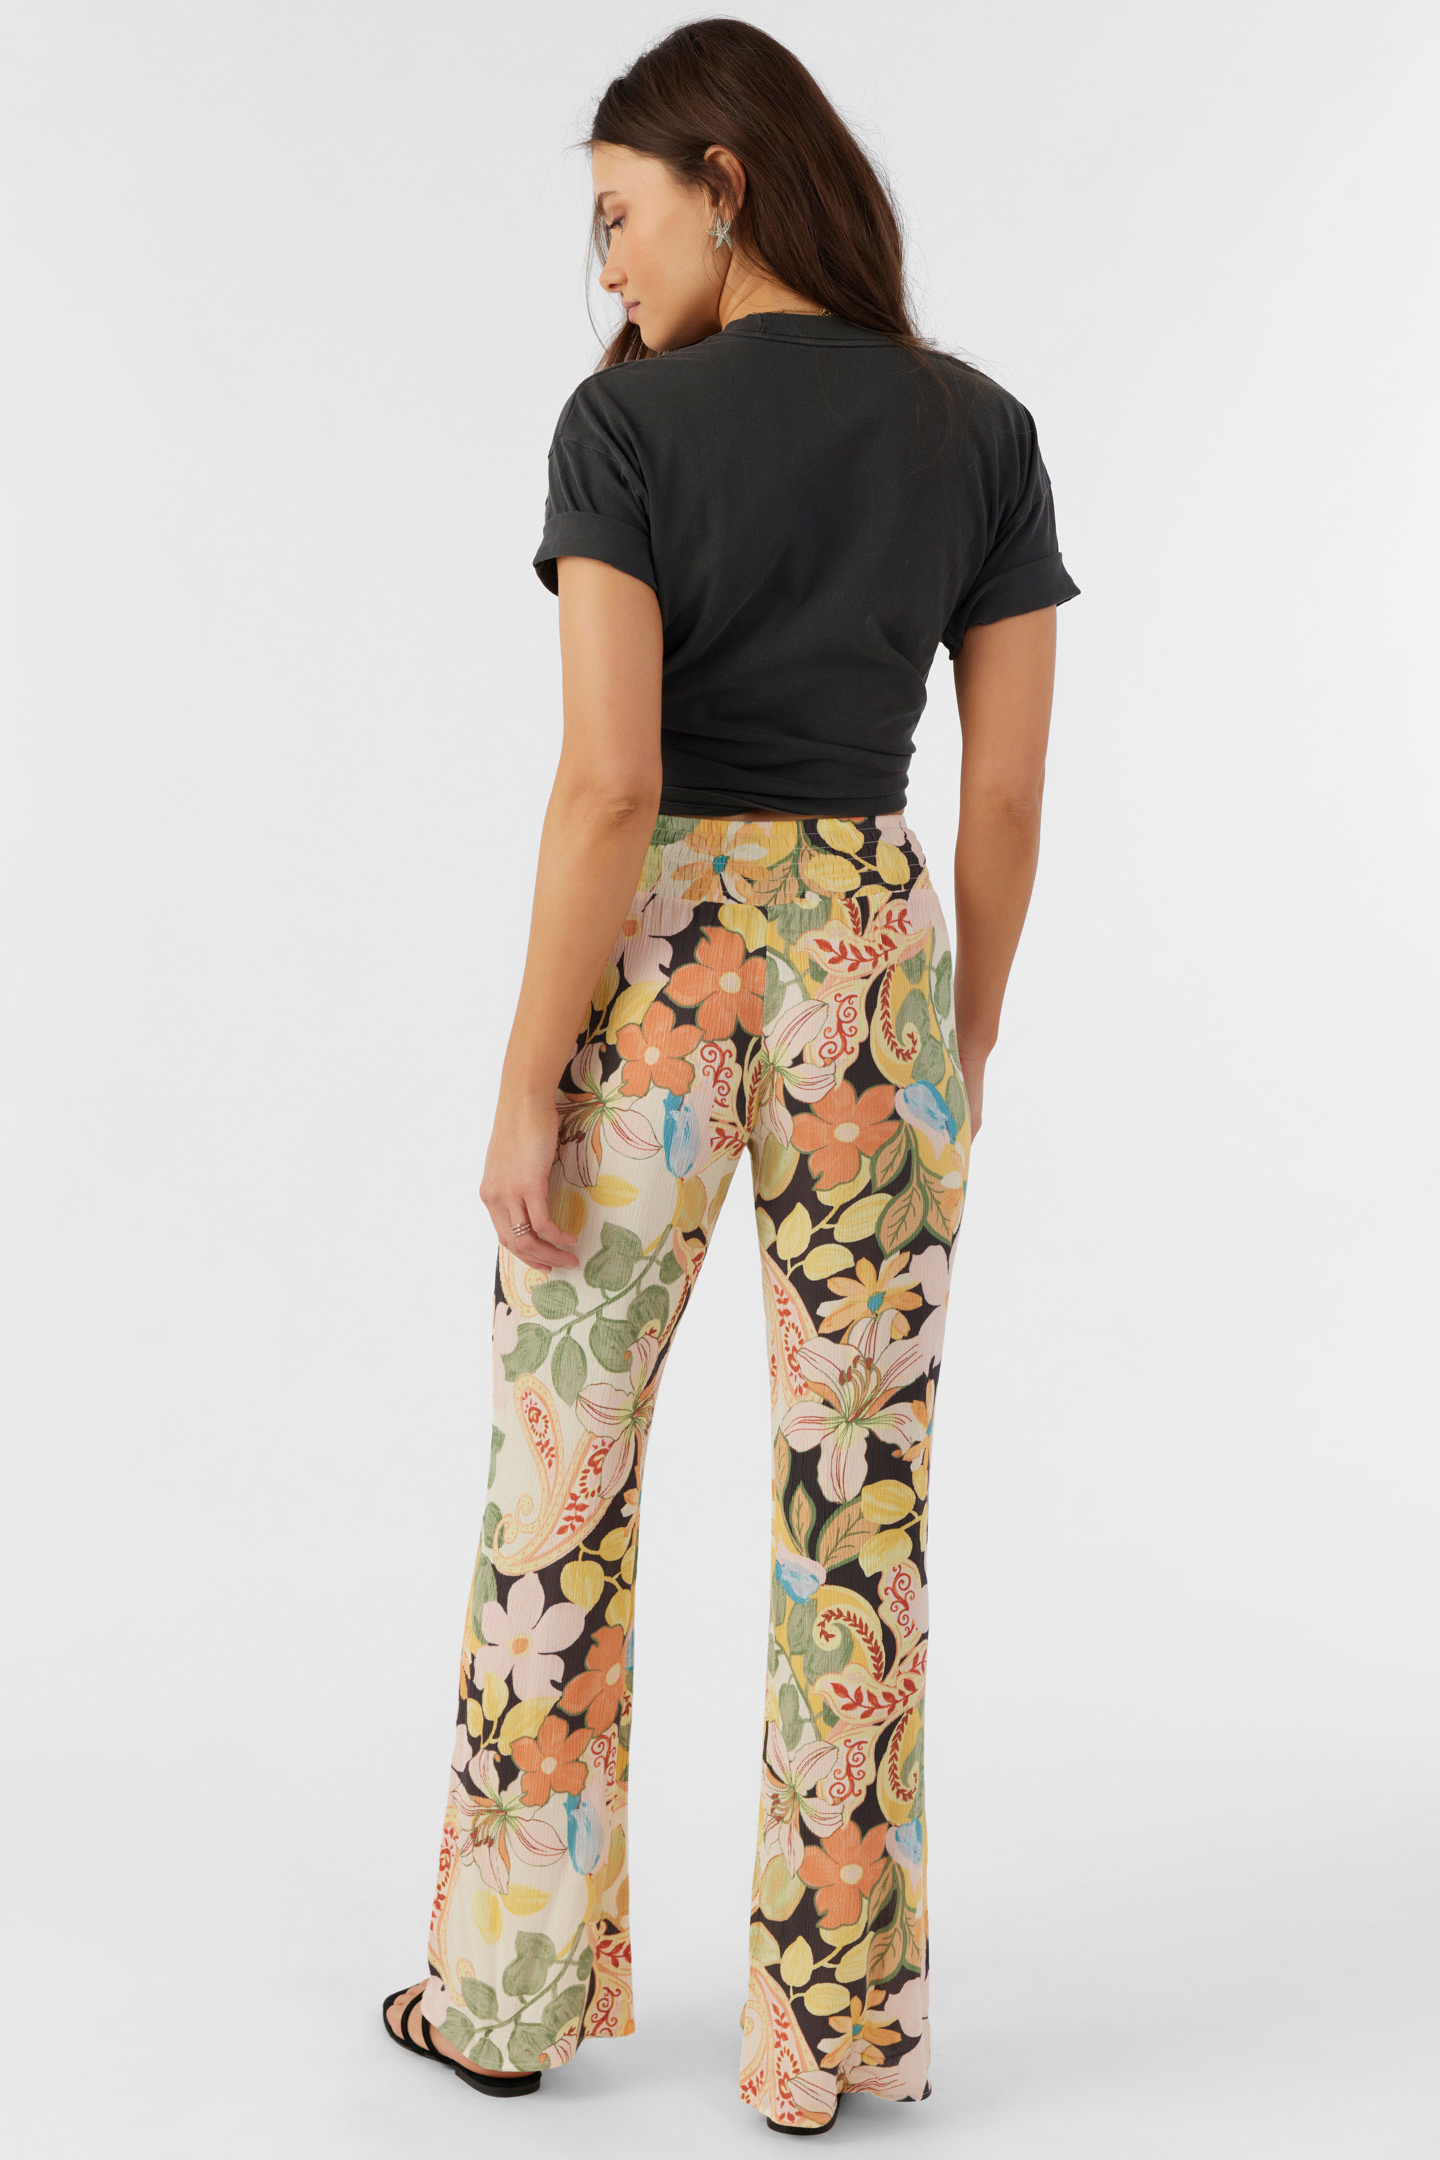 Johnny Floral Pants - Multi Colored